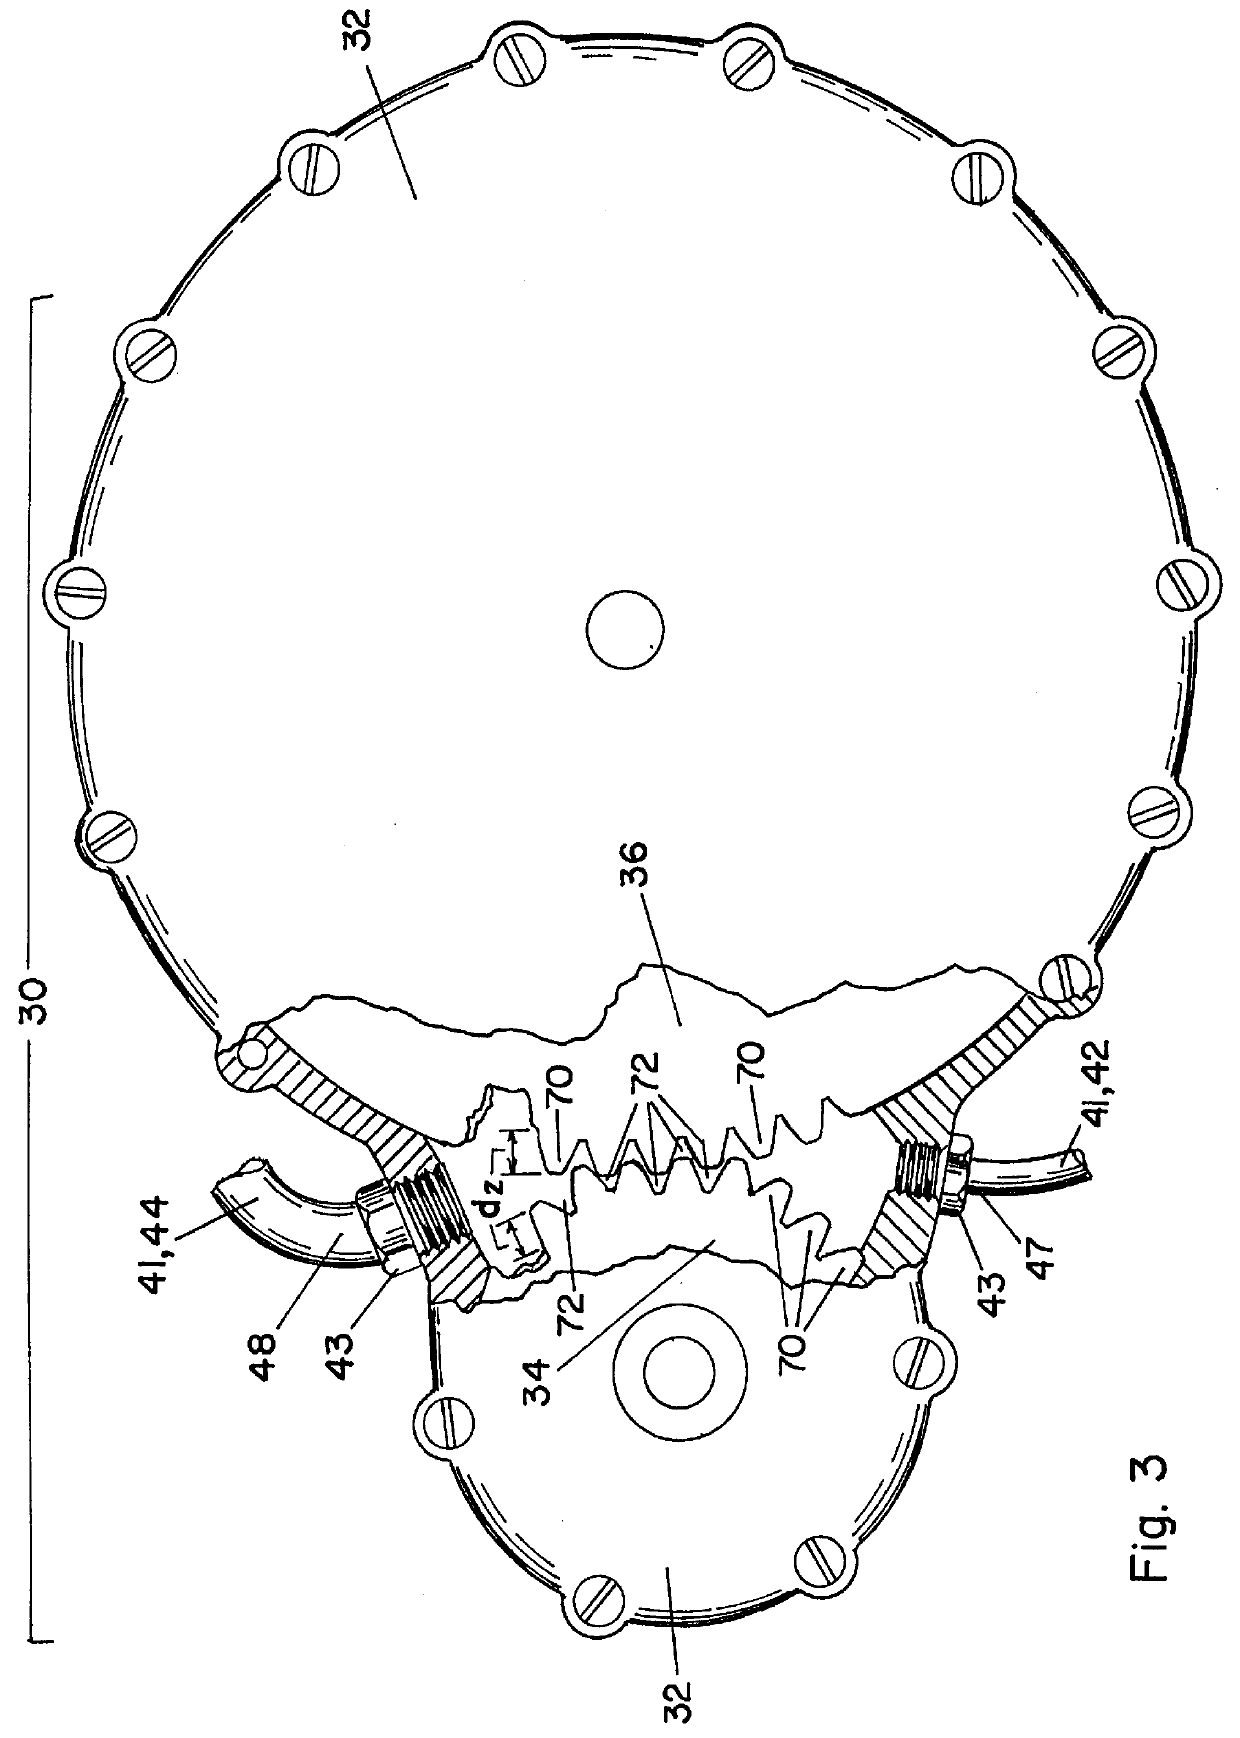 Hydraulic transmission for bicycles